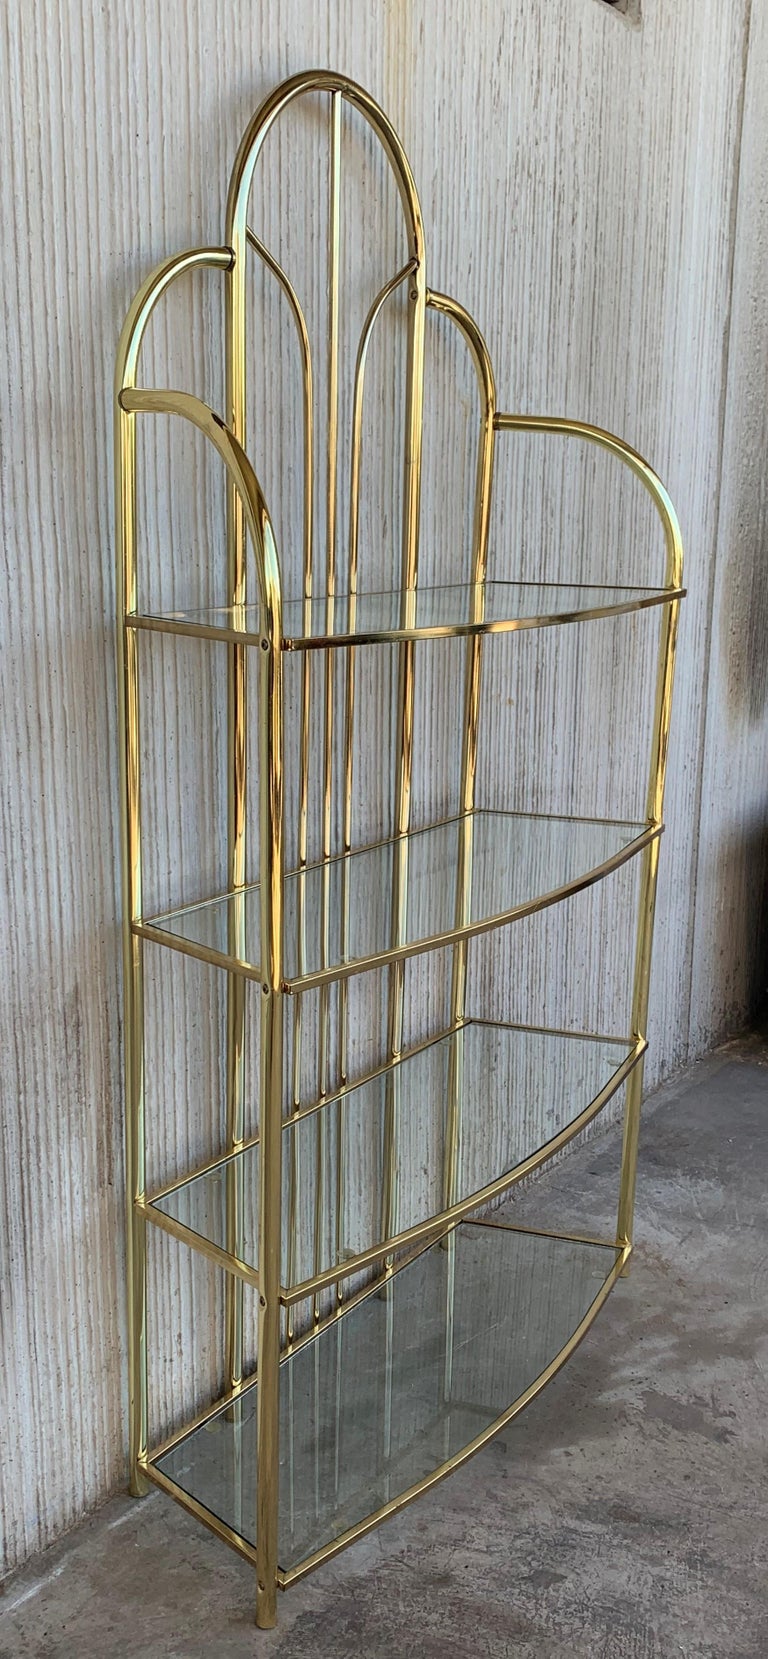 Vintage Brass Étagère Arched Glass Display Shelf with Four Shelves In Good Condition For Sale In Miami, FL